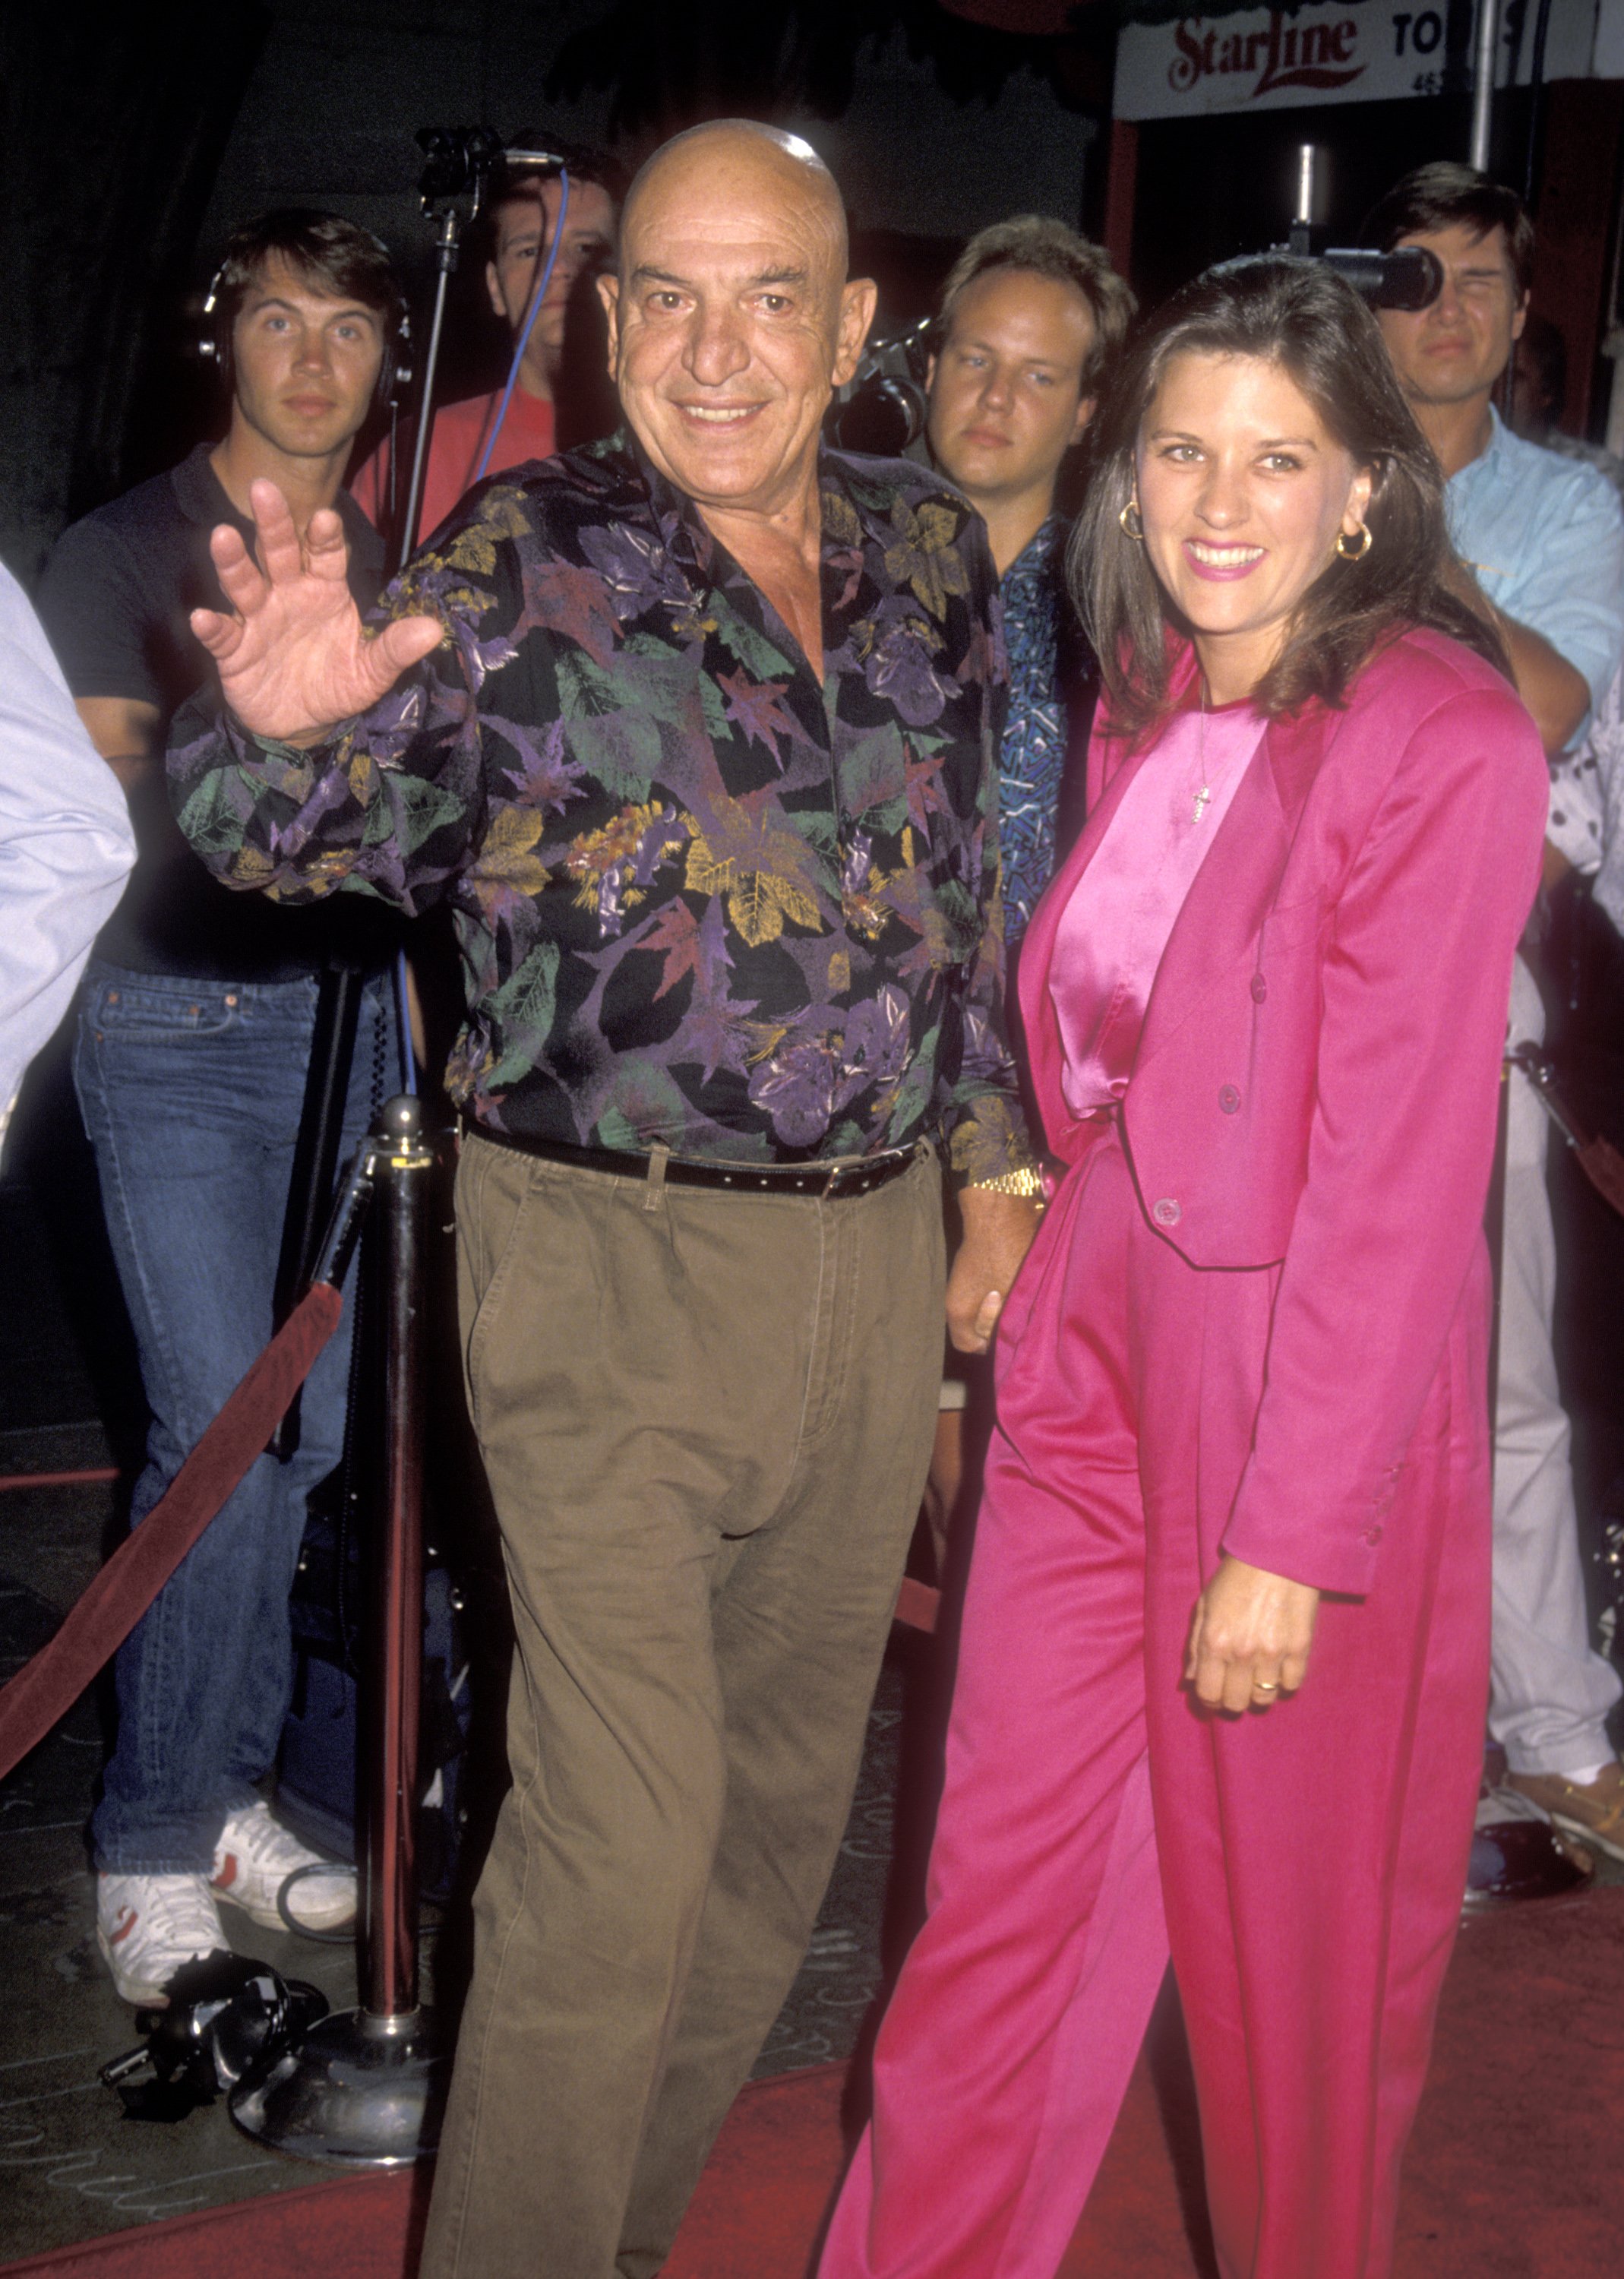 Actor Telly Savalas and wife Julie Savalas attend the "Air America" Hollywood Premieres at Mann's Chinese Theatre in Hollywood, California. | Source: Getty Images